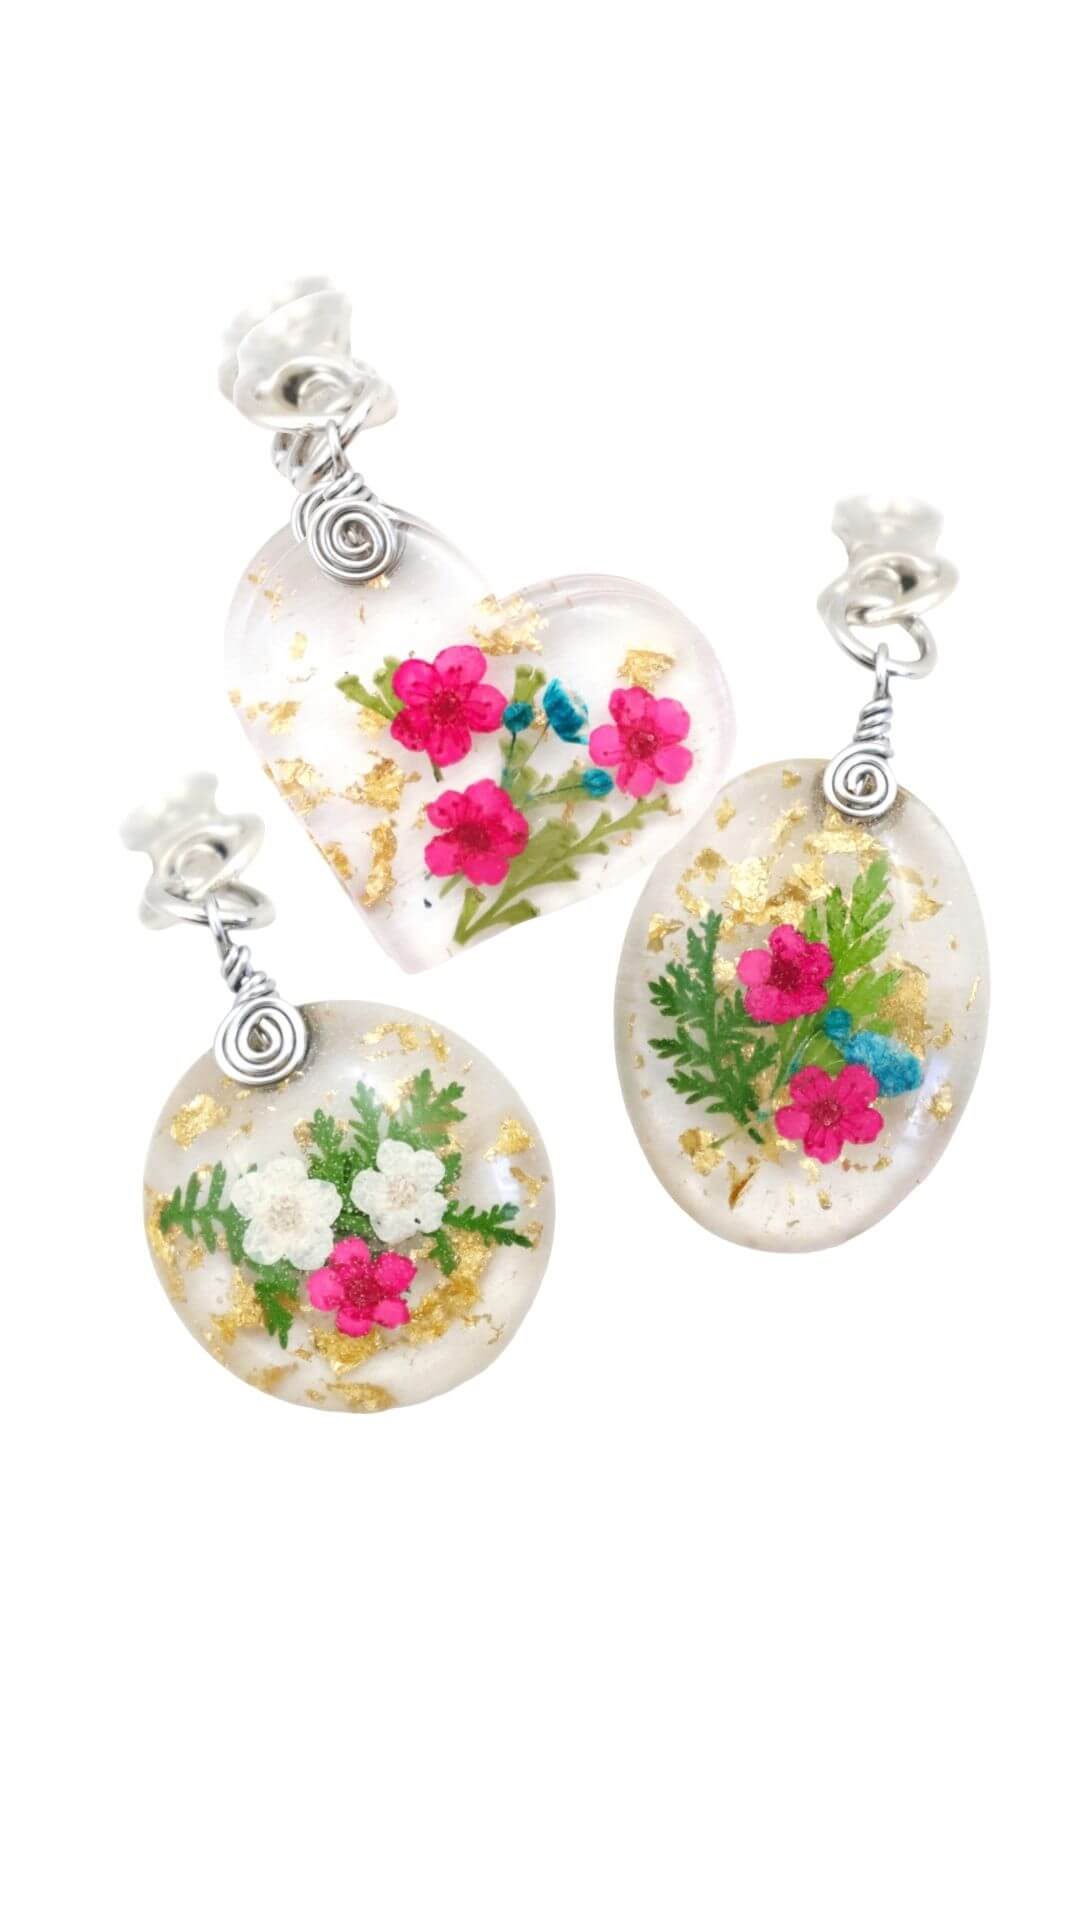 Flower-Charms-Real-Pressed-Flower-Charms-For-Planner-Kaleidoscopes-And-Polka-Dots